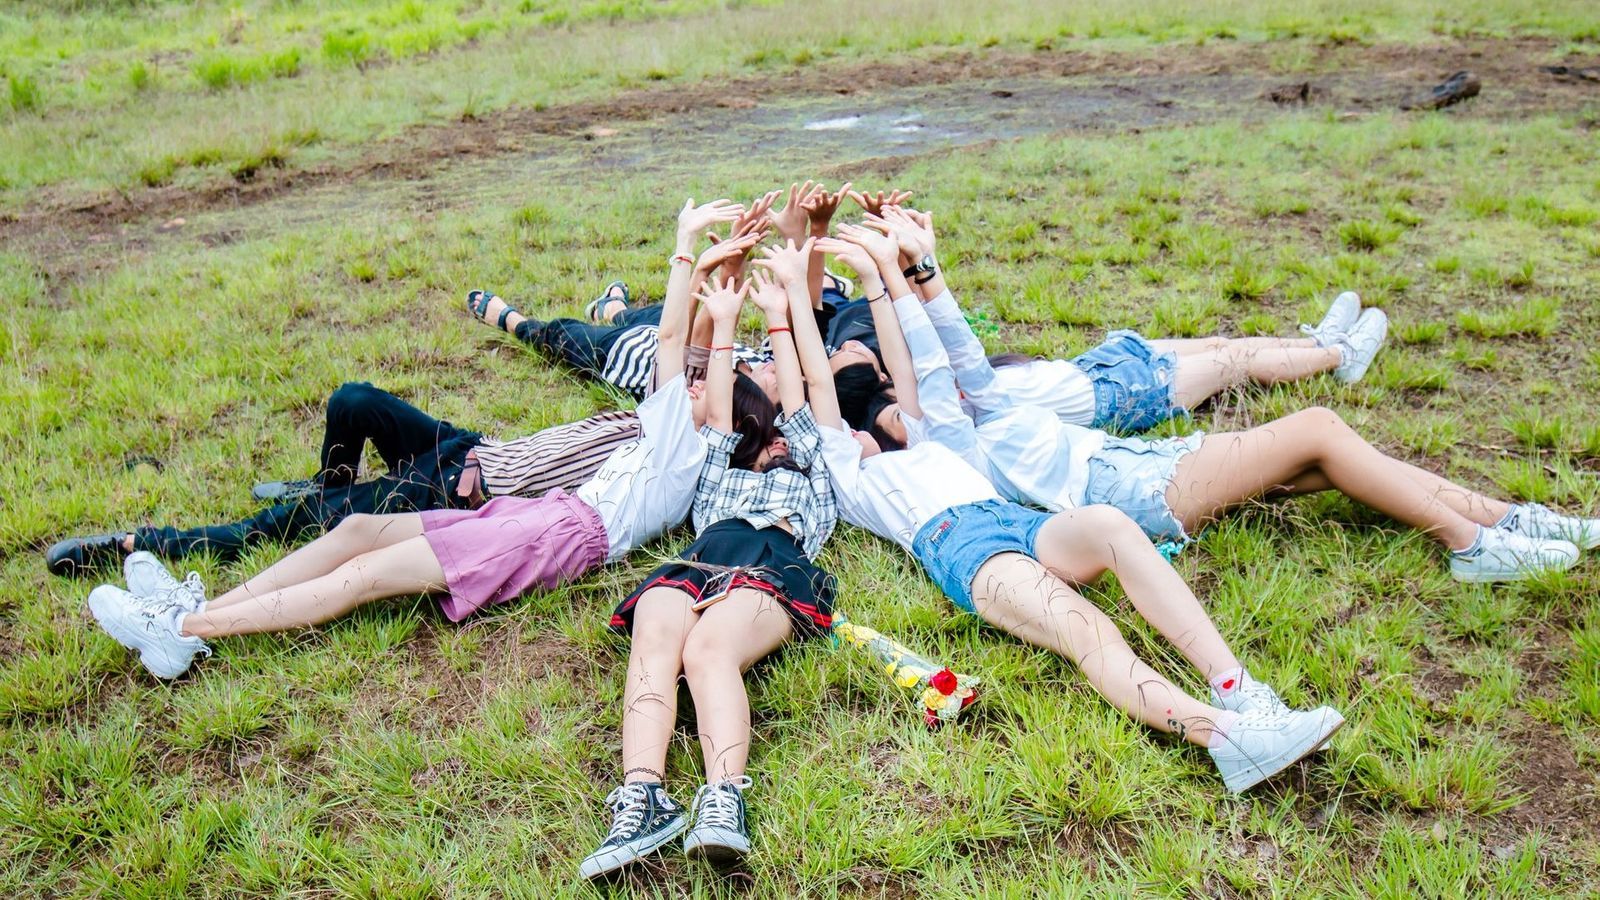 Group of Friends in Circle While Lying on Green Grass Wallpaper